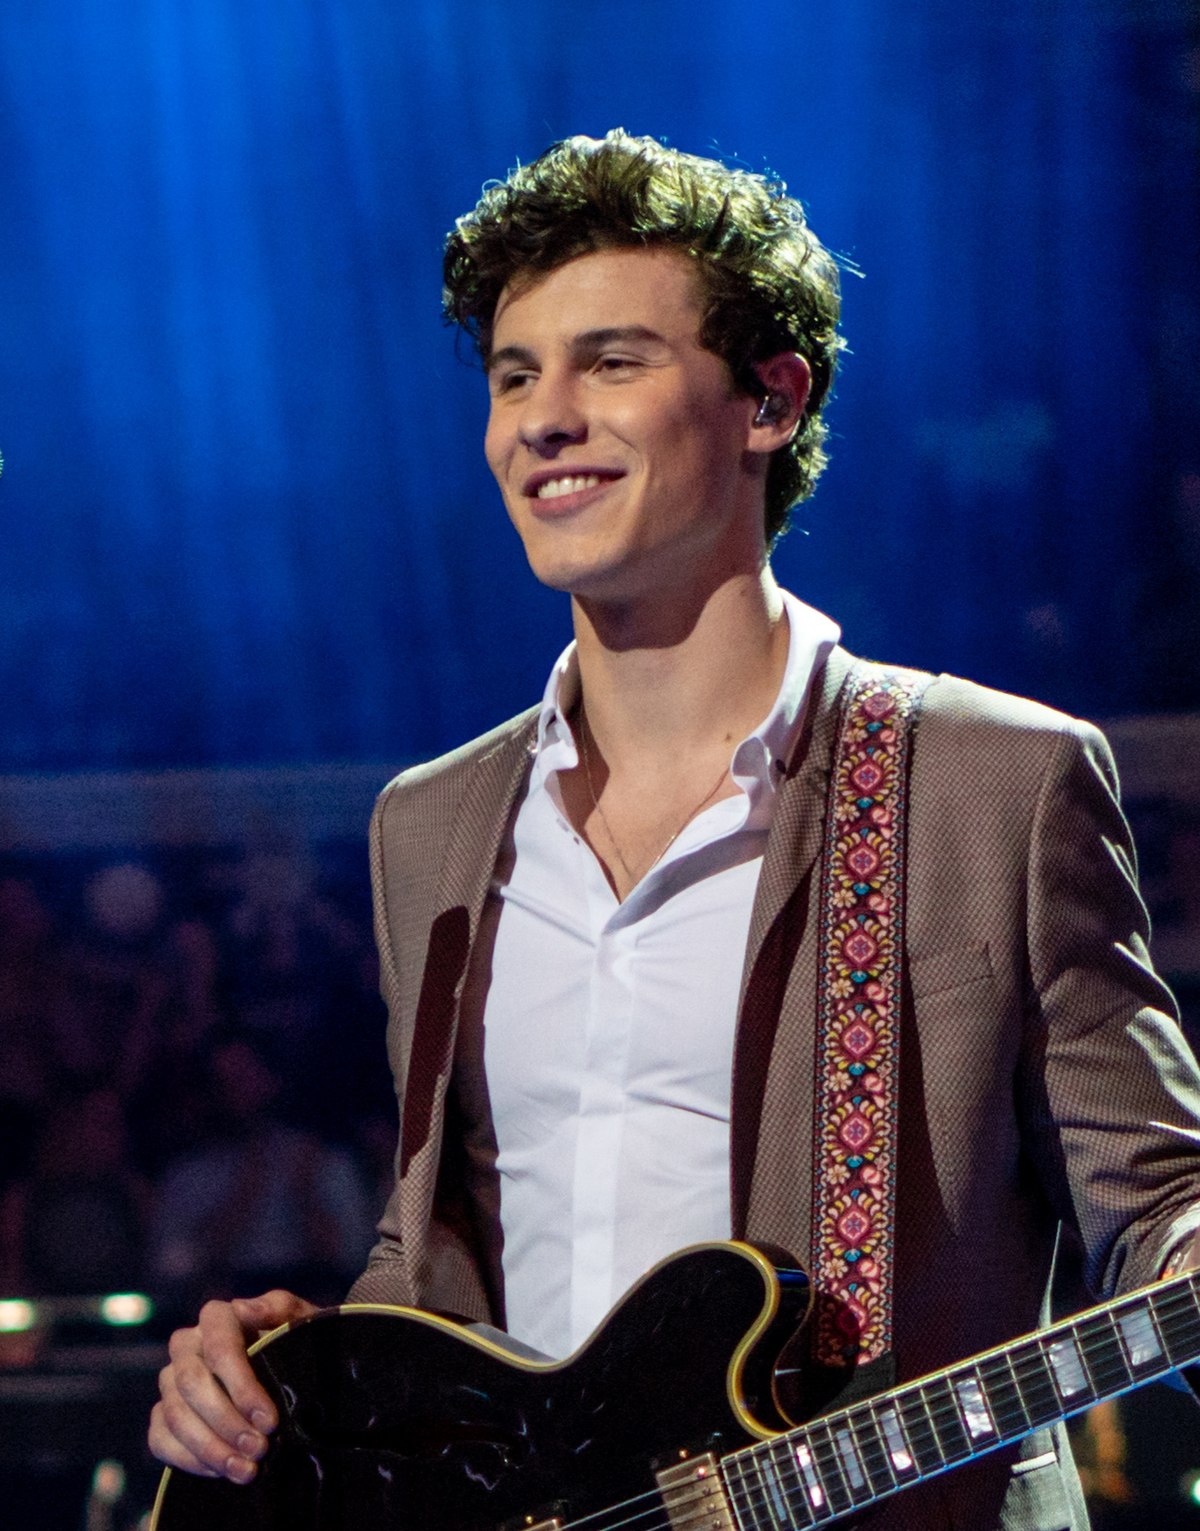 1200px-Shawn_Mendes_at_The_Queen%27s_Birthday_Party_%28cropped%29.jpg